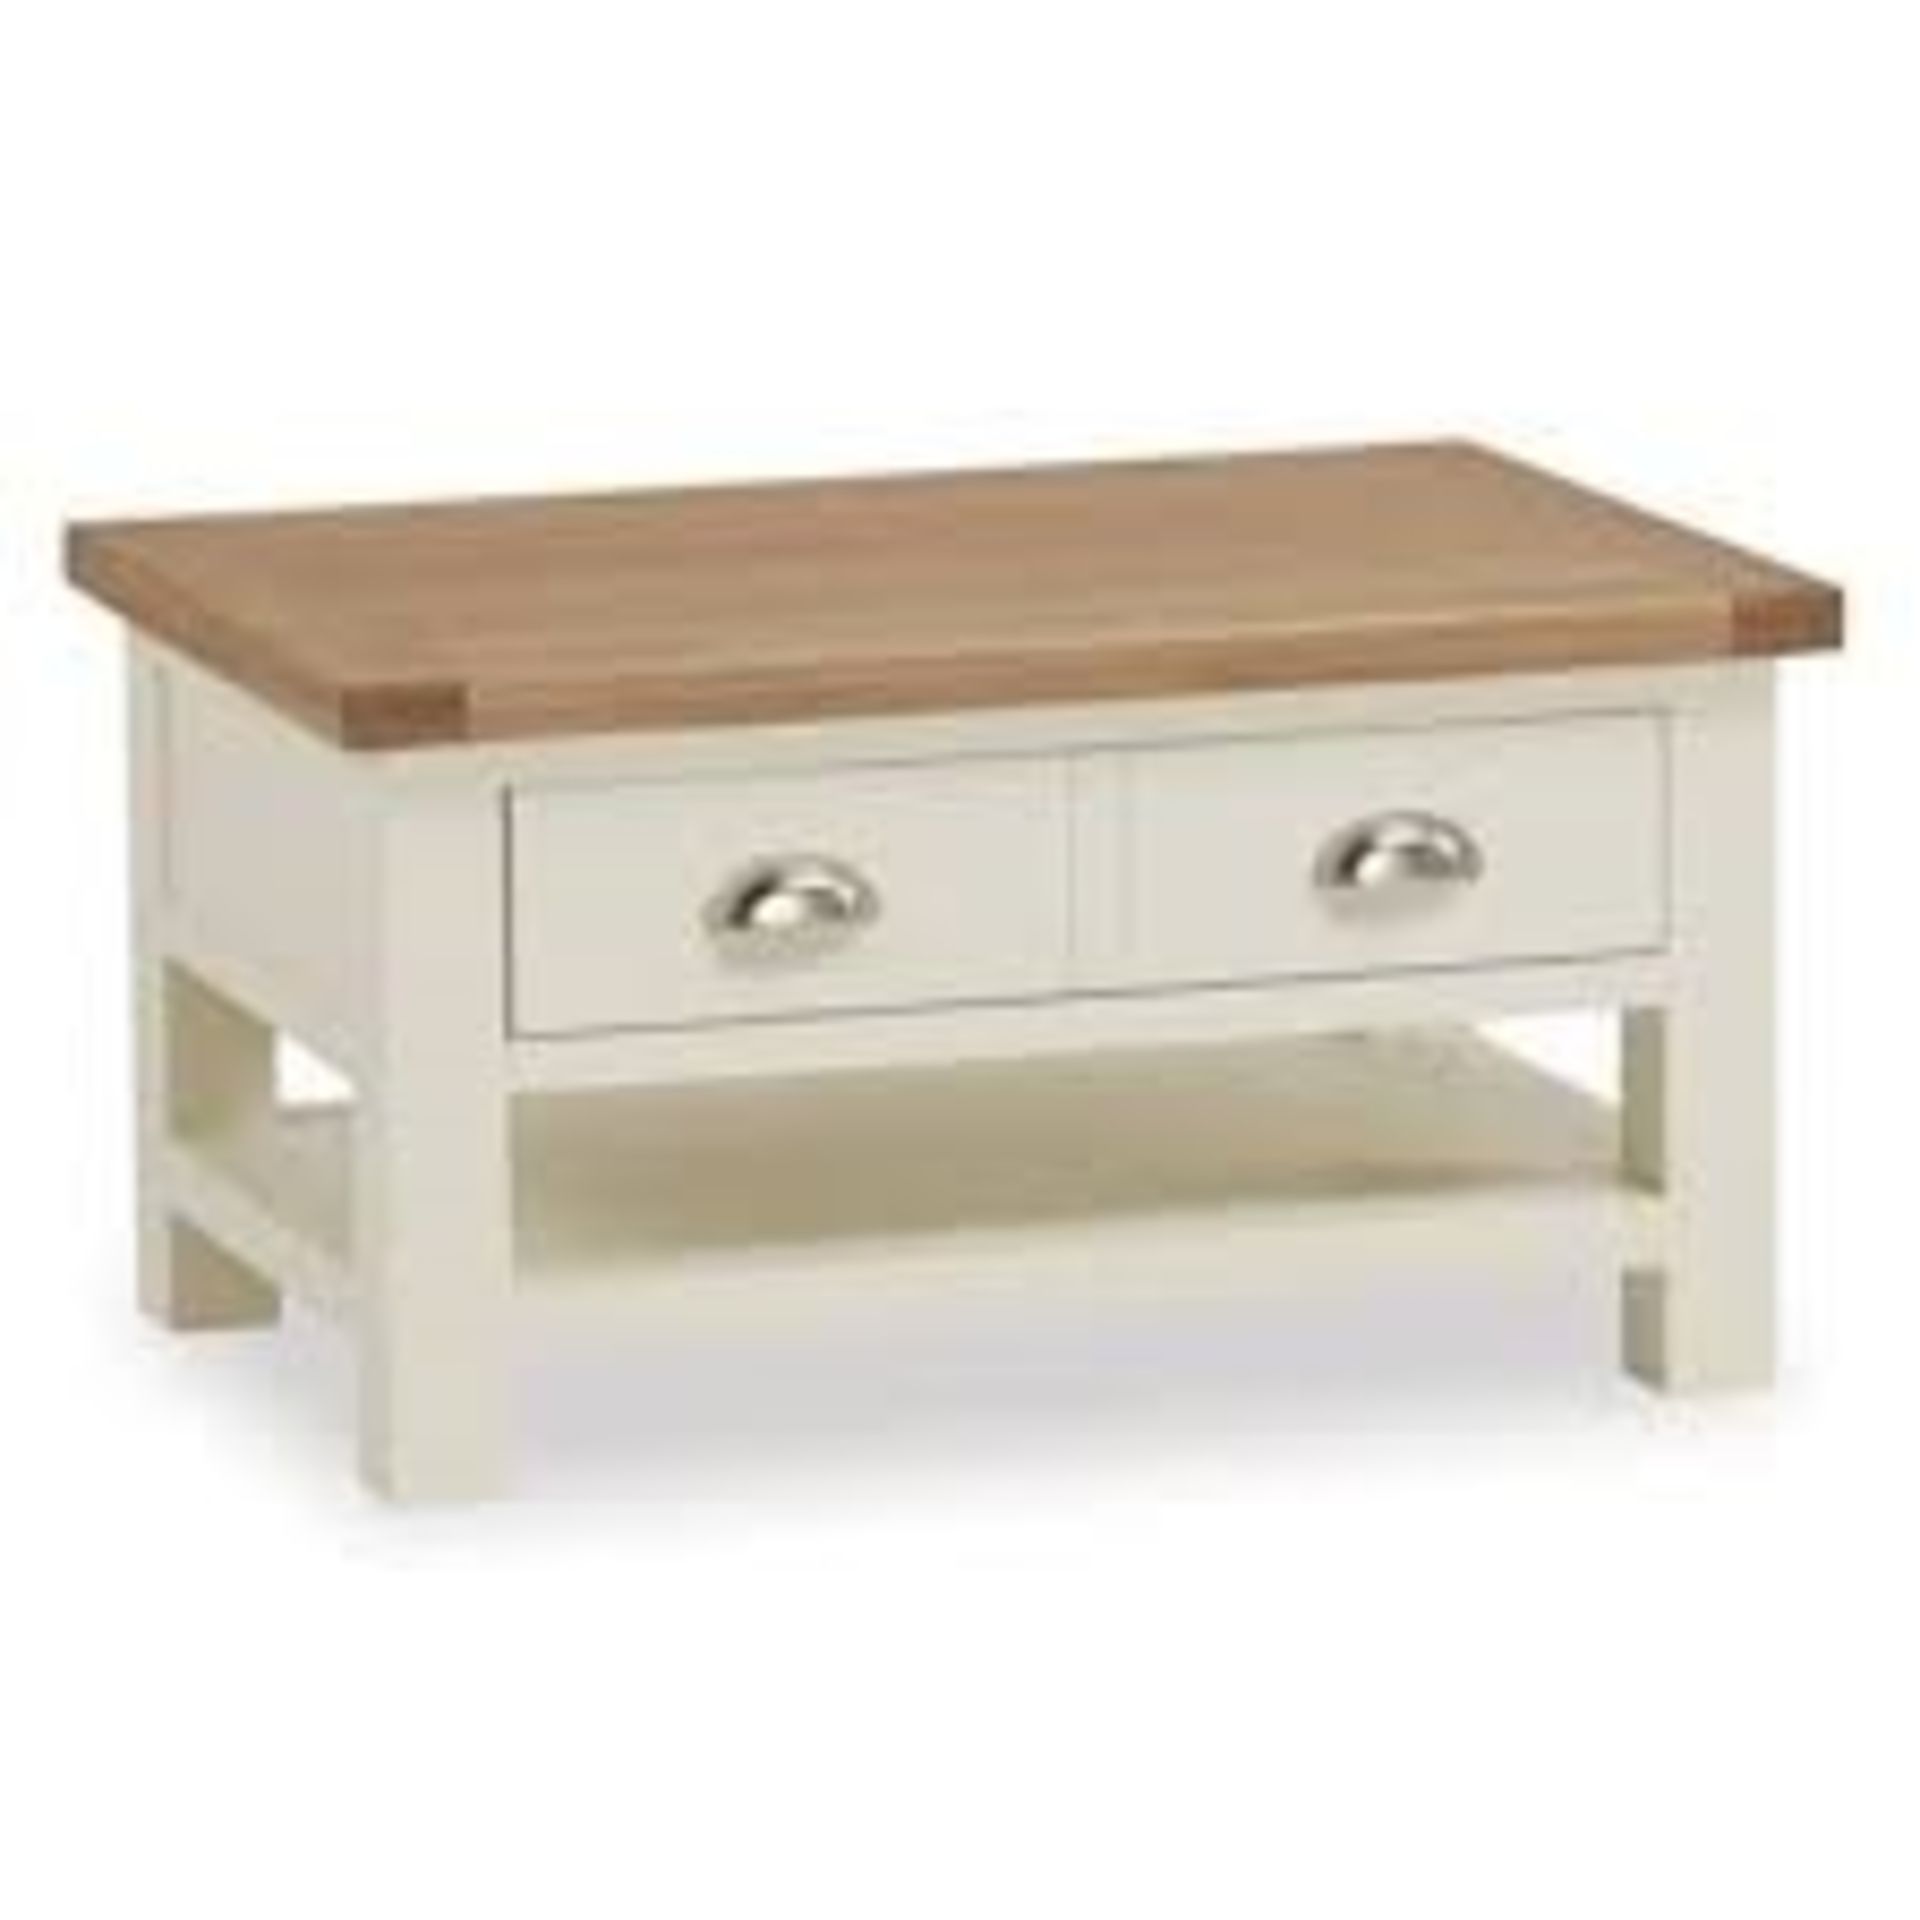 1 GRADE A BOXED DAYMER SMALL COFFEE TABLE IN CREAM / RRP £209.00 (VIEWING HIGHLY RECOMMENDED)